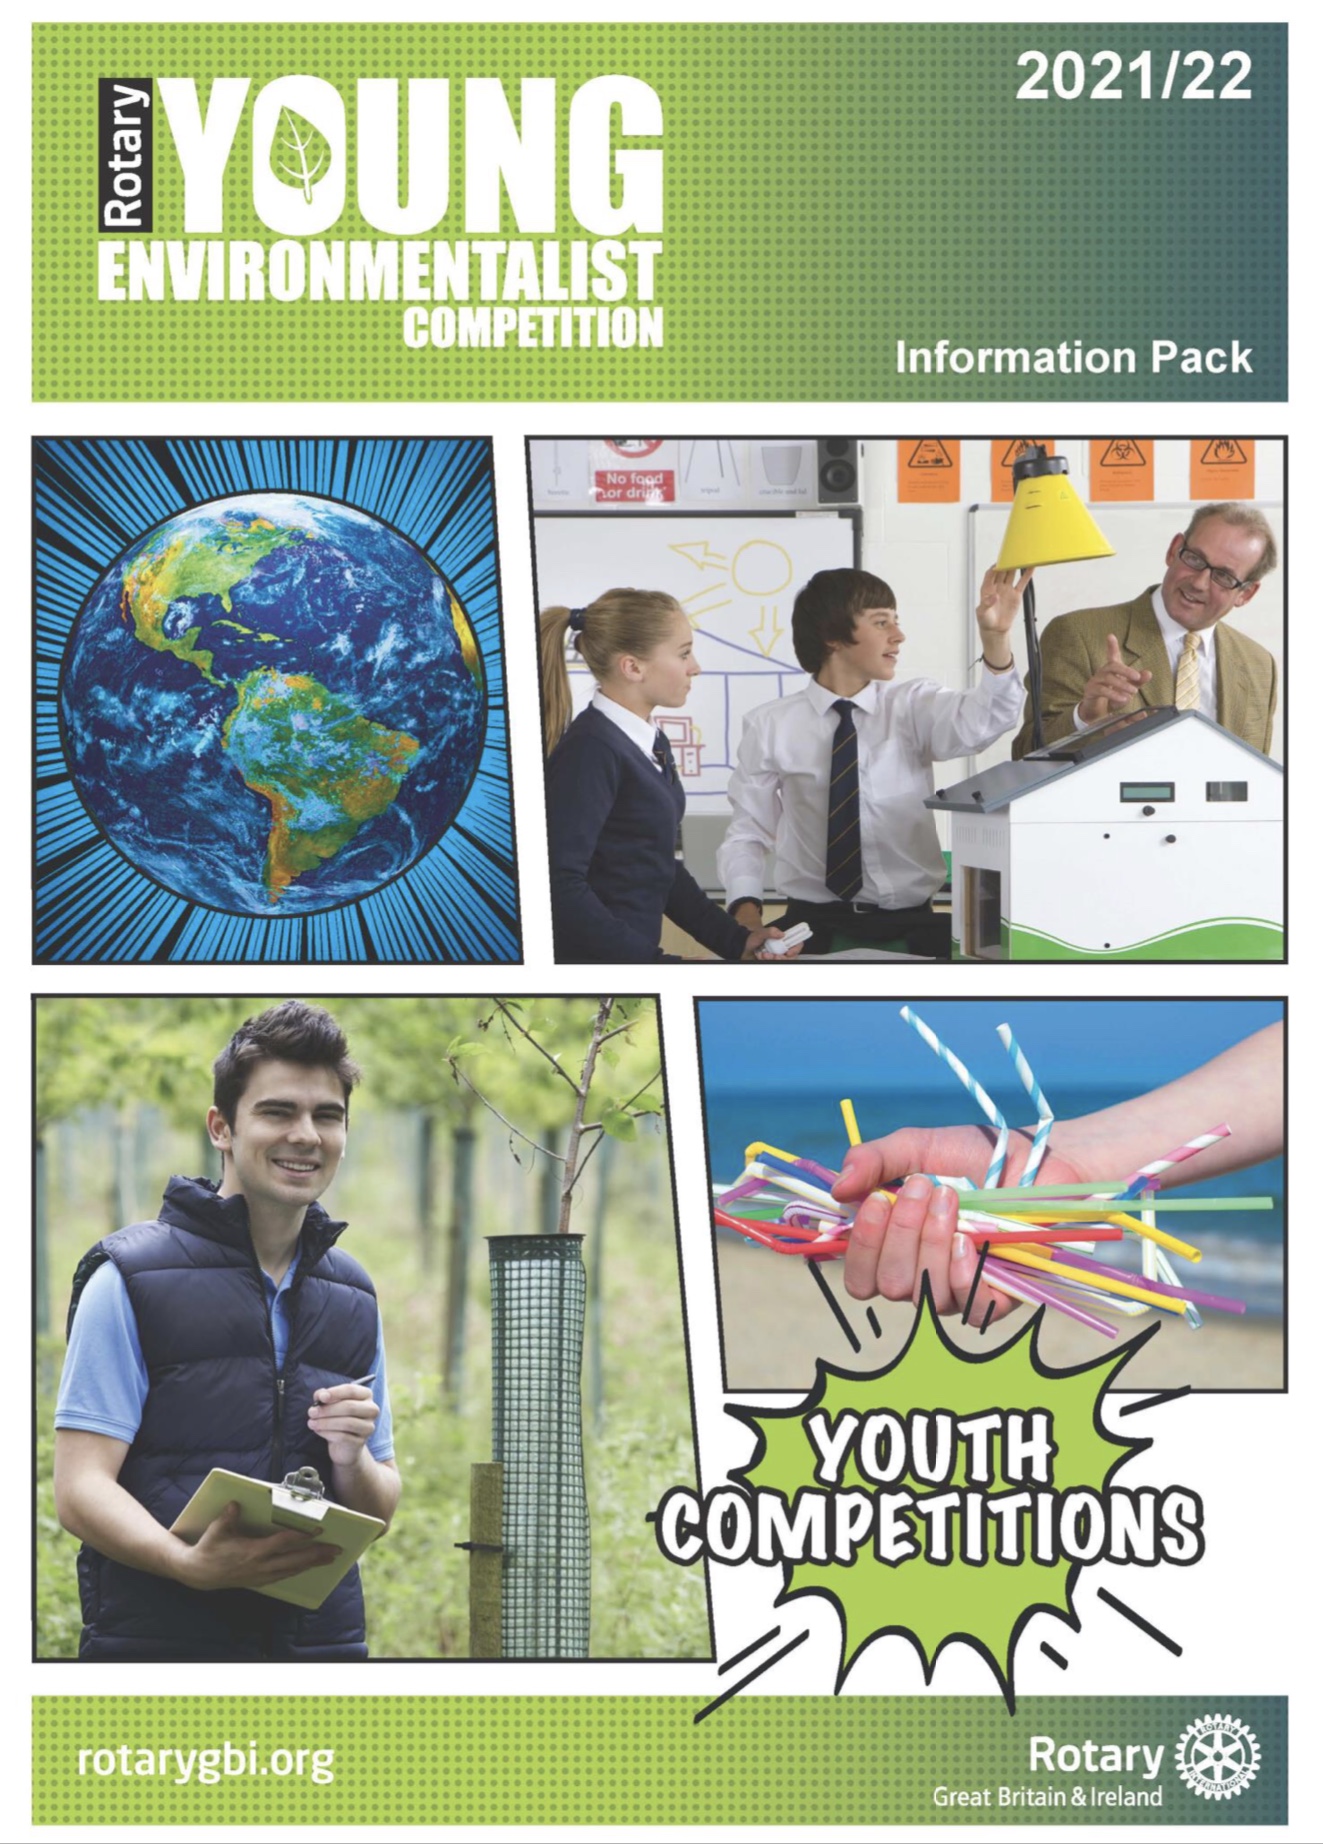 Cover of Young Environmentalist Competition Brochure